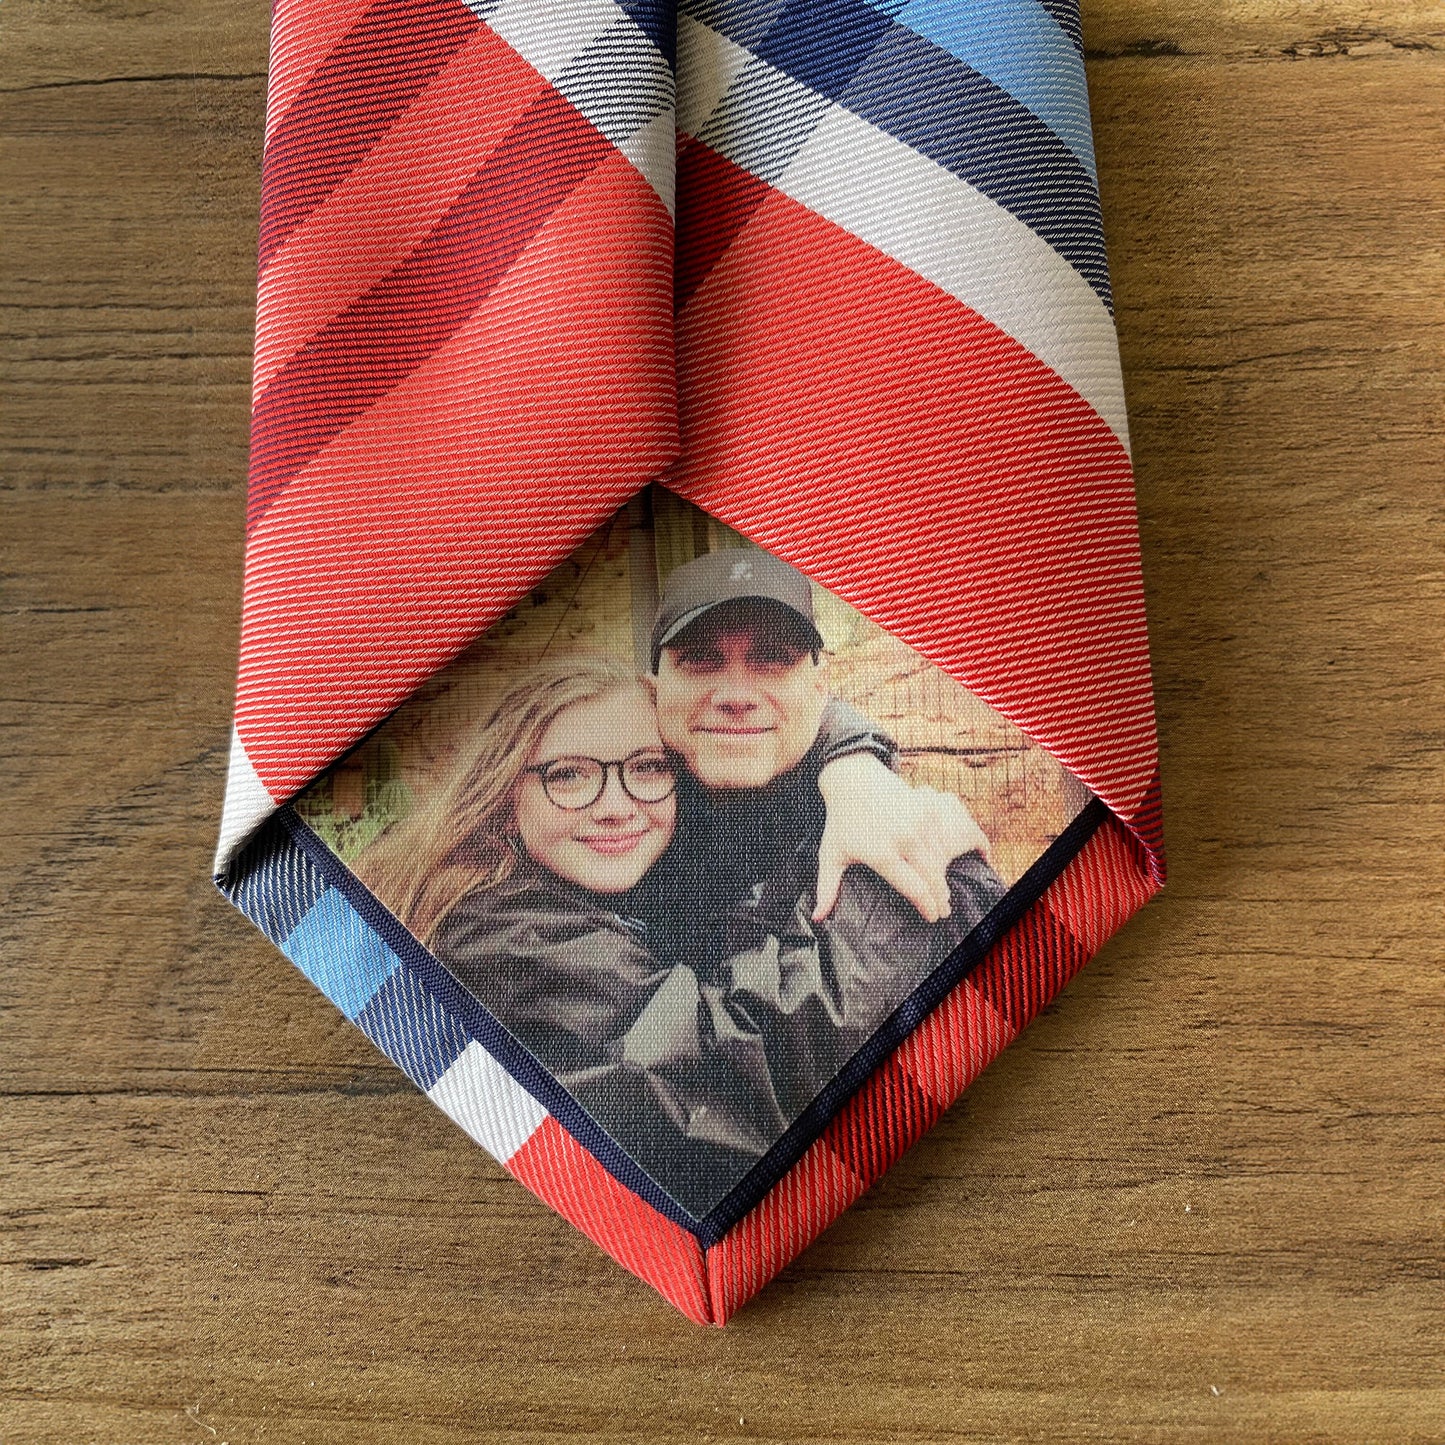 Custom Photo Tie Patch: A red and blue striped tie featuring a couple's photo.